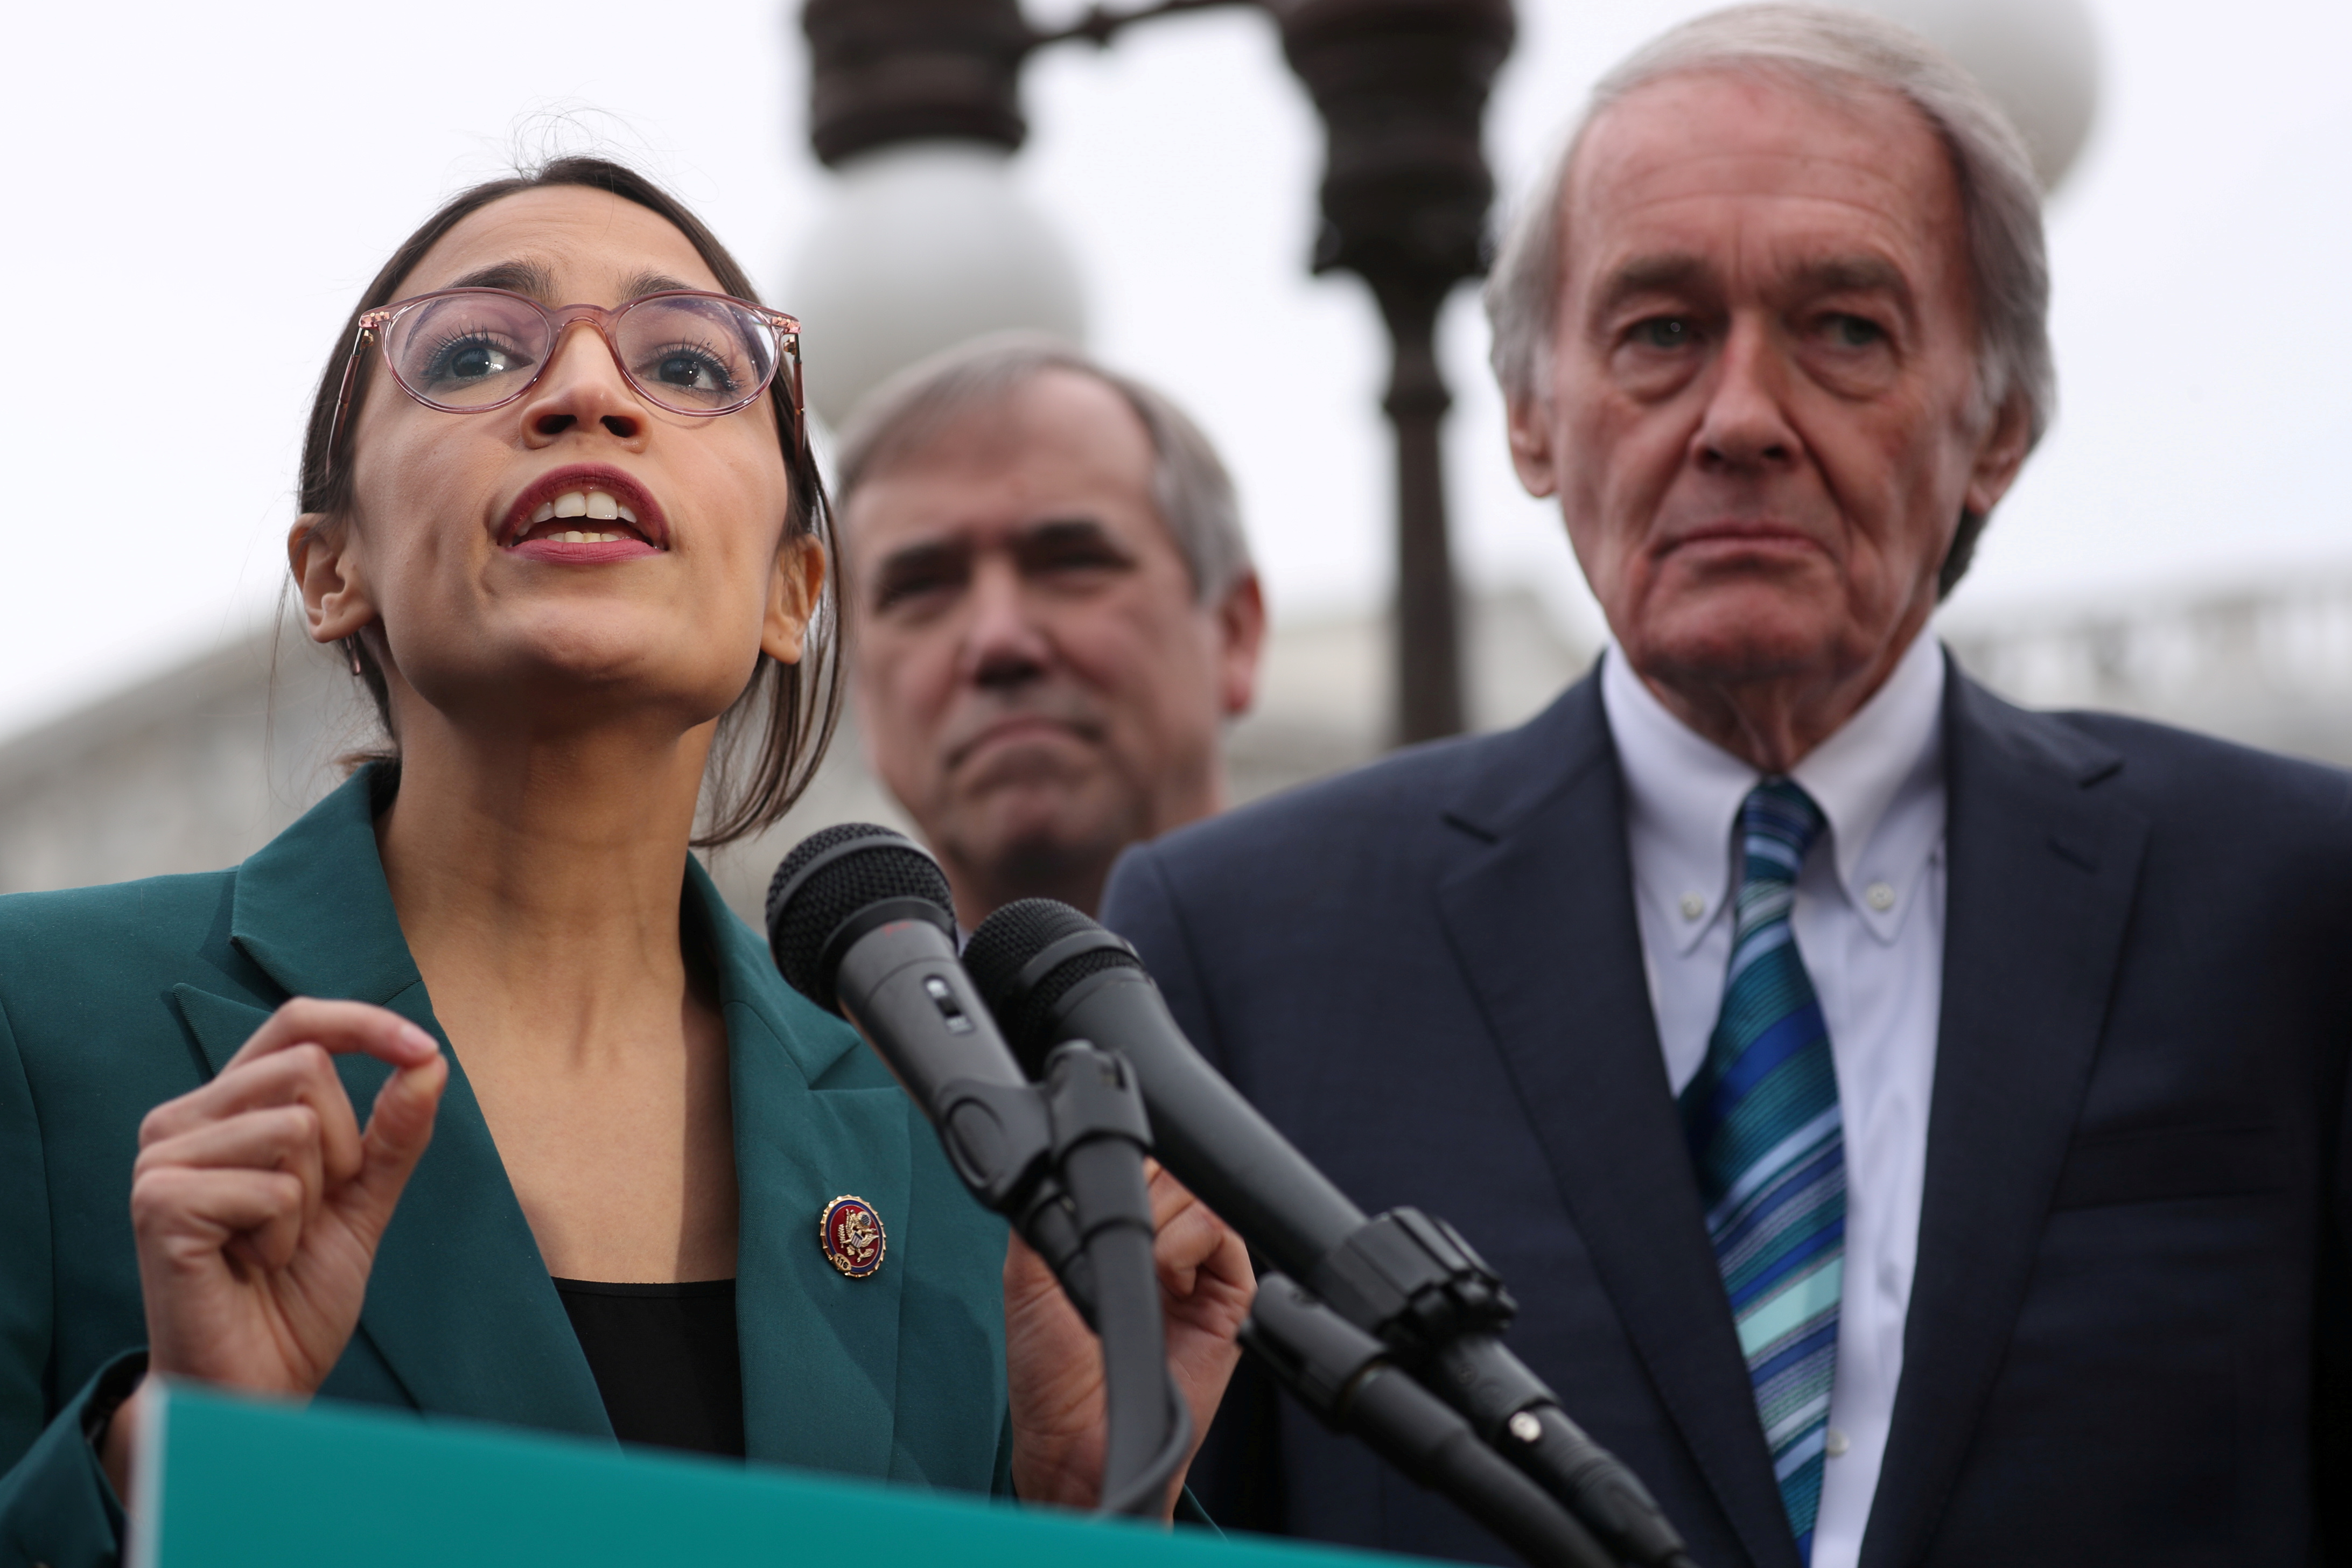 U.S. Representative Ocasio-Cortez and Senator Markey hold a news conference for their proposed "Green New Deal" to achieve net-zero greenhouse gas emissions in 10 years, at the U.S. Capitol in Washington